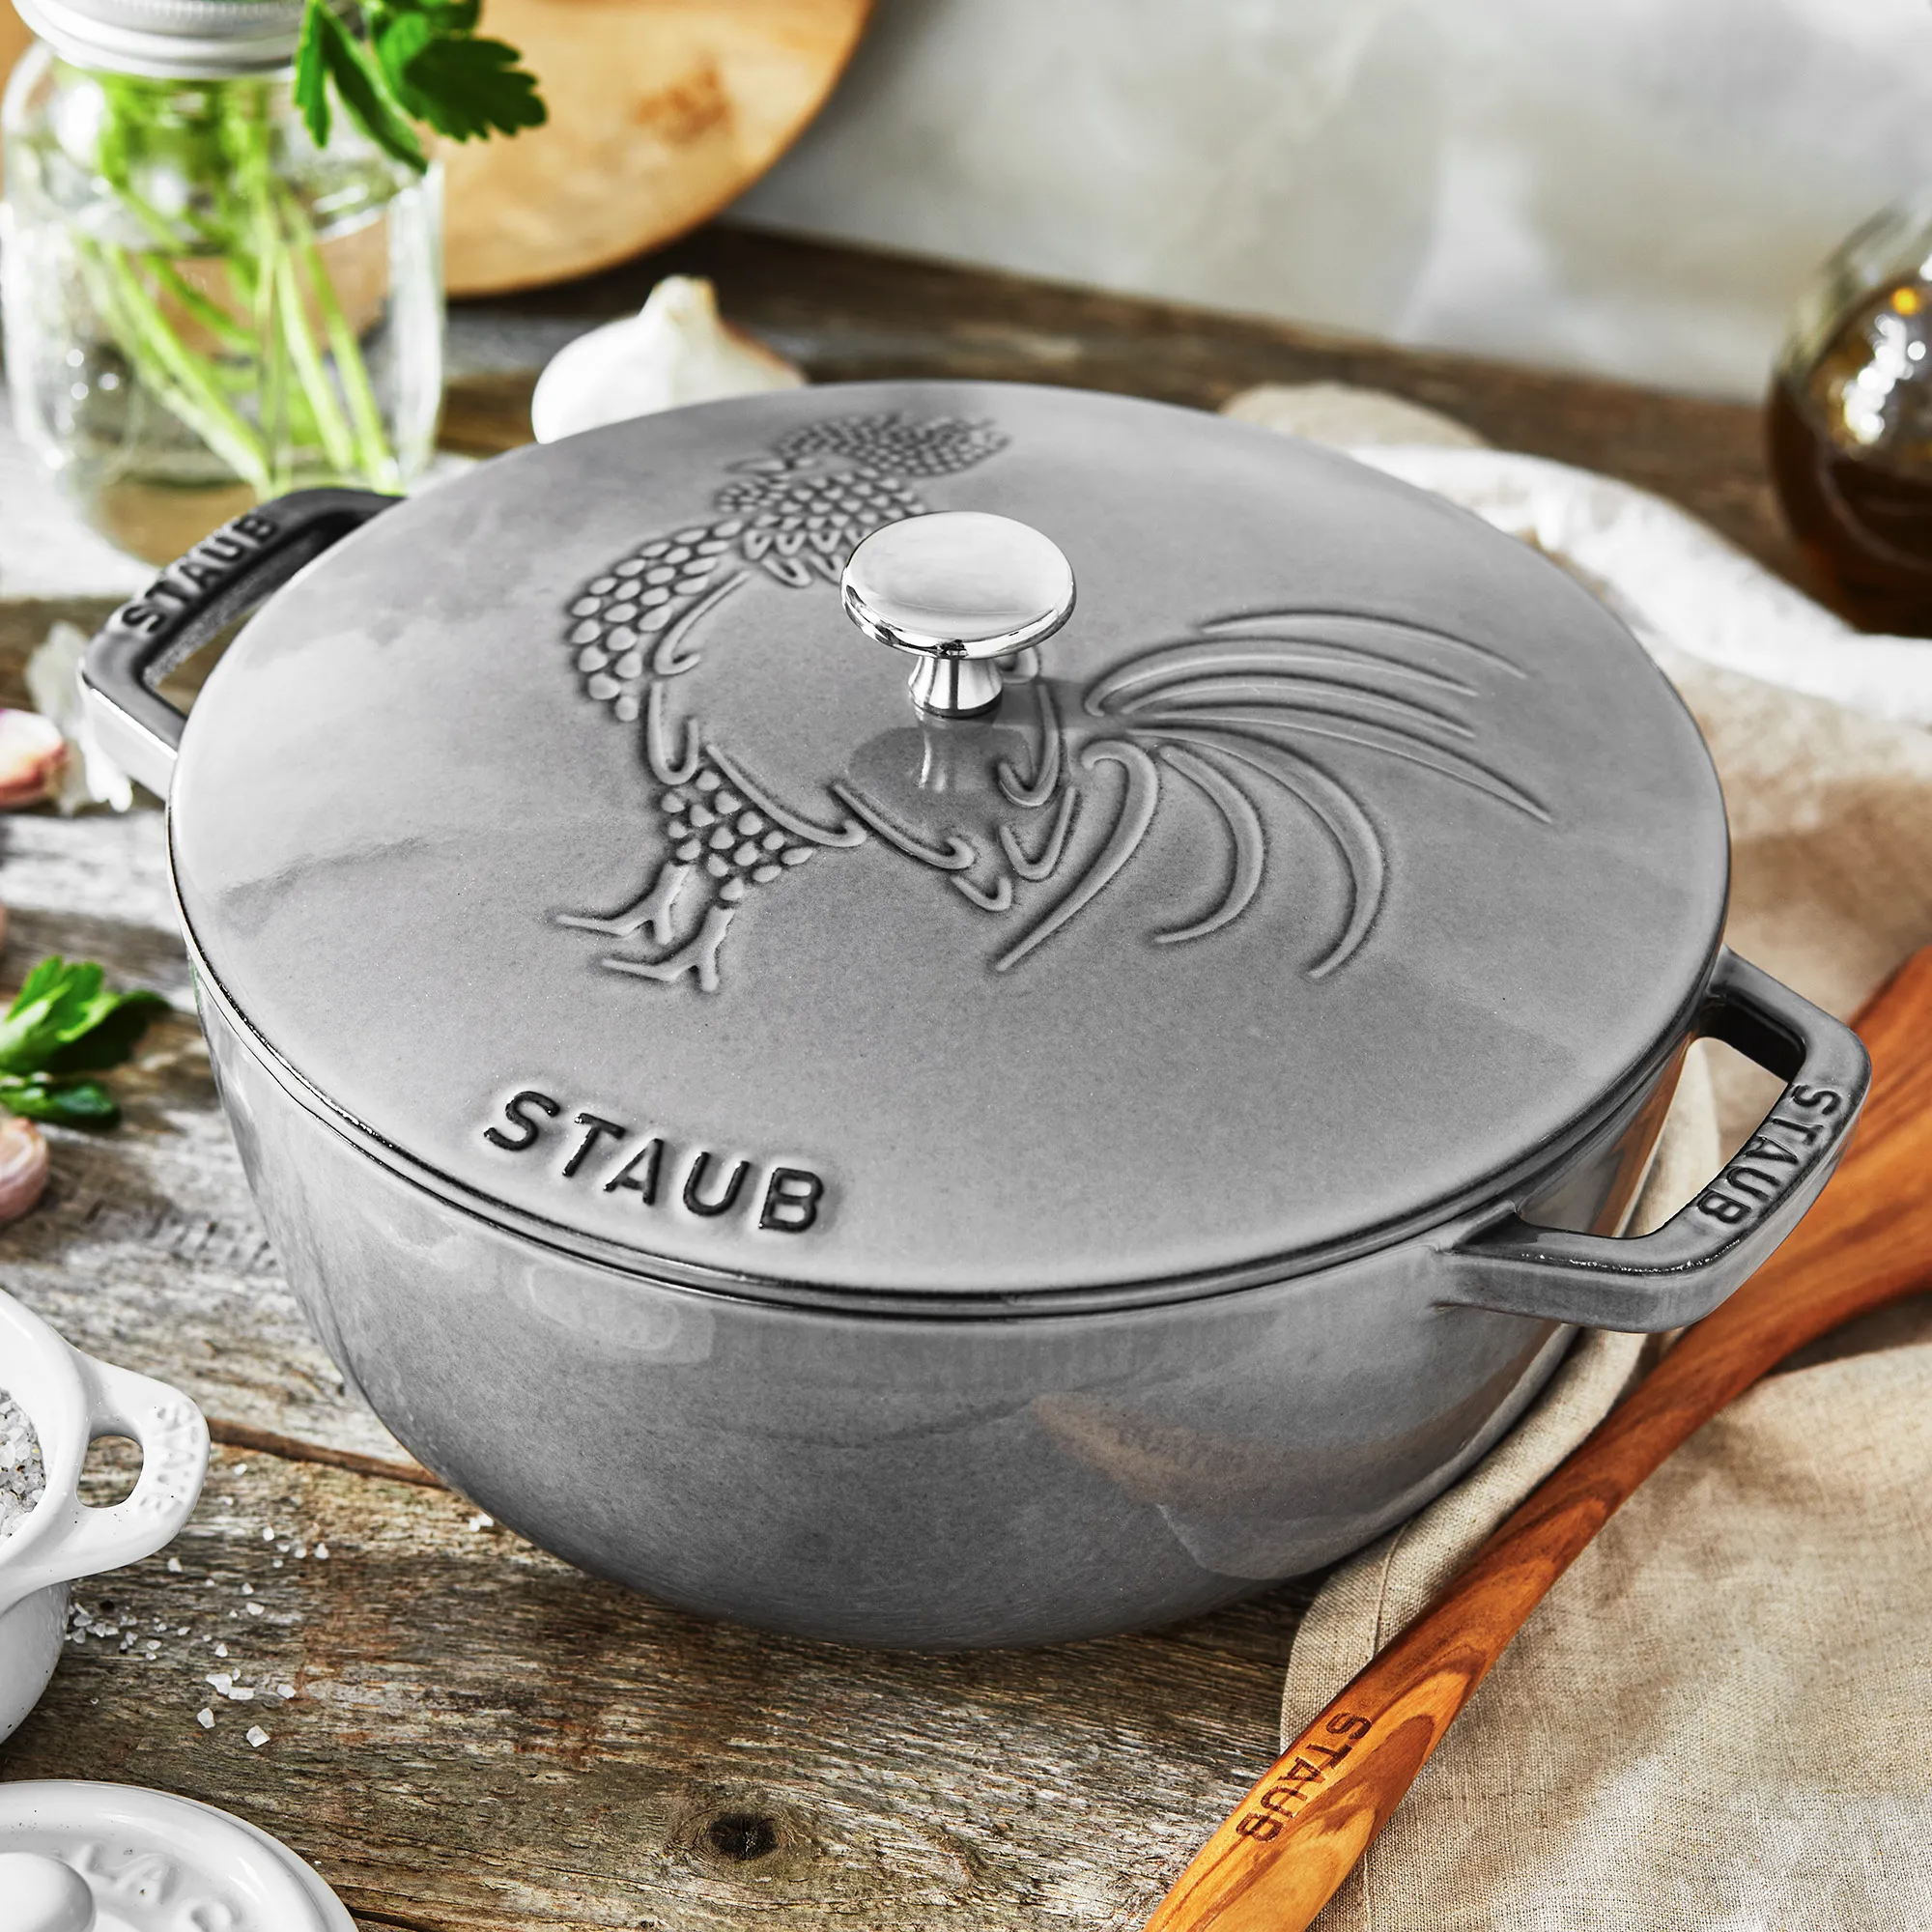 https://www.homethreads.com/files/zwilling/11752418-staub-cast-iron-375-qt-essential-french-oven-rooster-graphite-grey-2.webp